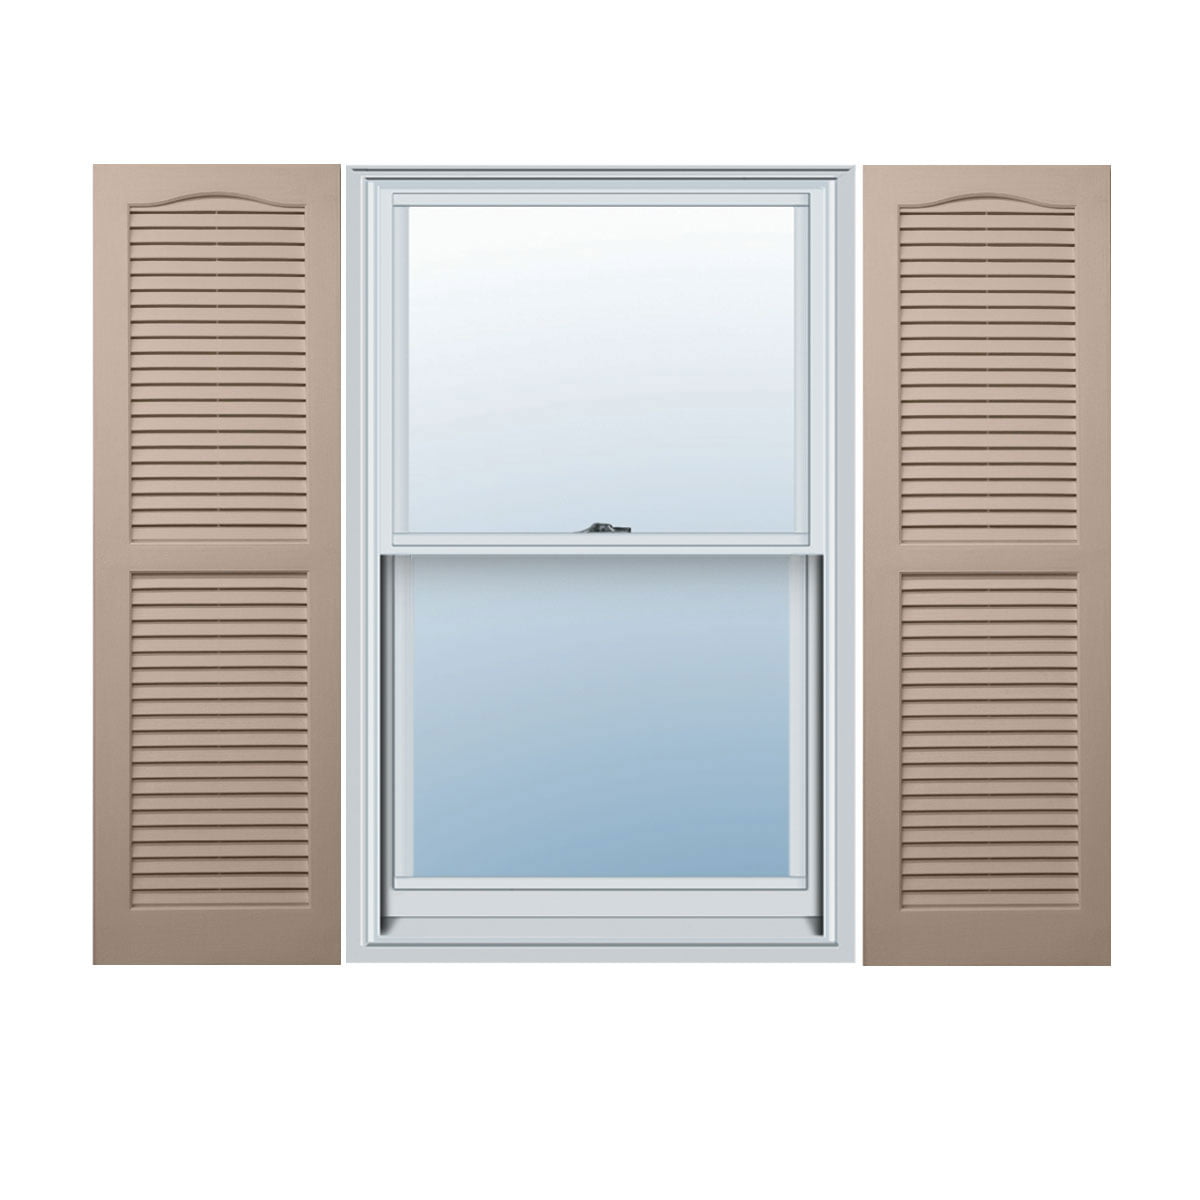 Homeside Open Louver Shutter 1 Pair 14-1/2in 049 Royal x 67in